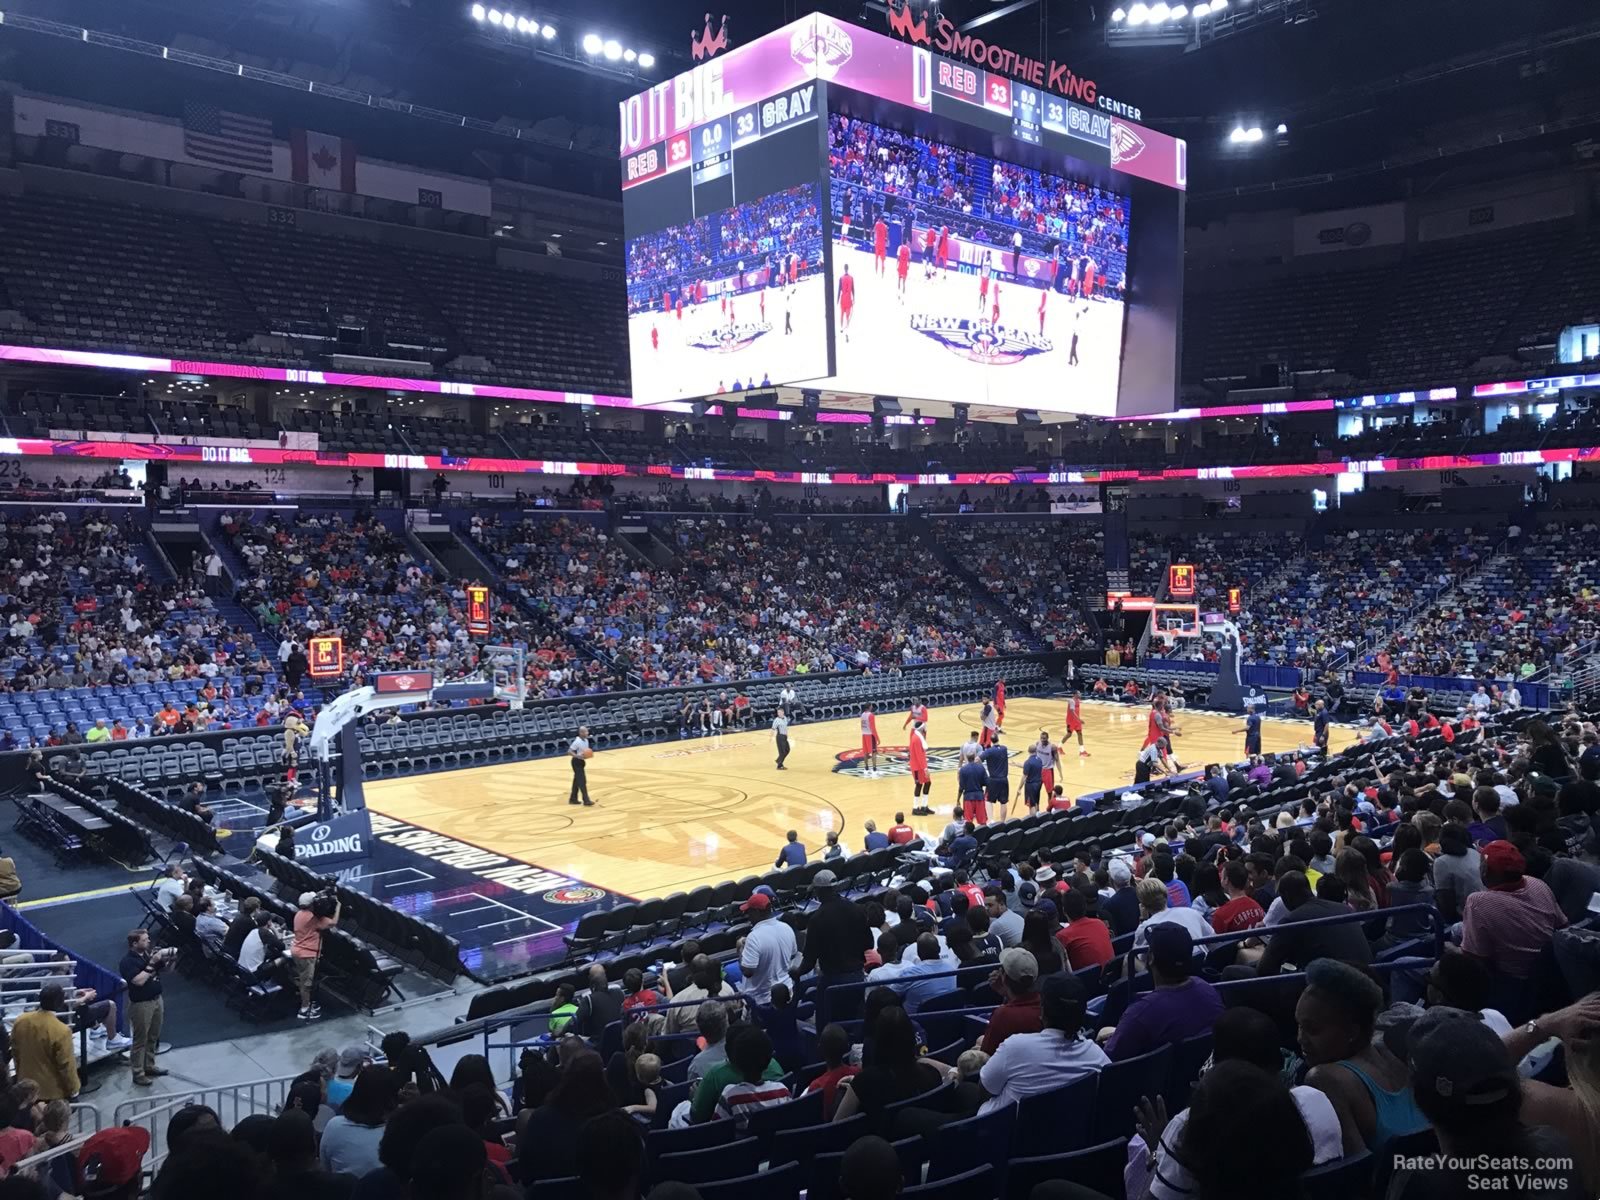 Smoothie King Center Section 115 - New Orleans Pelicans - RateYourSeats.com1600 x 1200